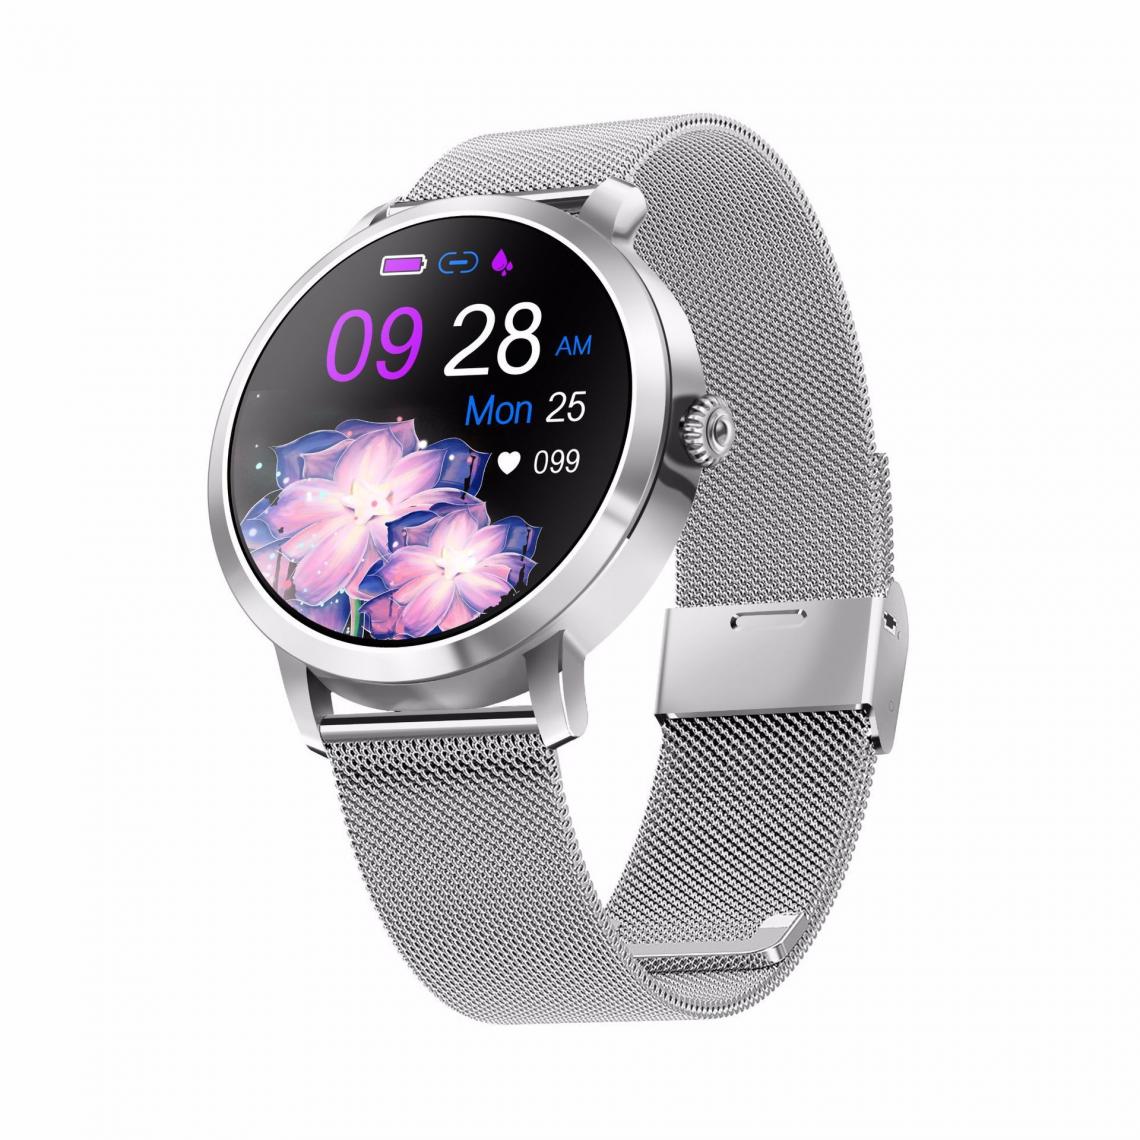 Chronotech Montres - Women Smart Watch with Female Function, Waterproof Sport Smartwatch, Blood Oxygen and Heart Rate Monitor, Calorie Pedometer, Fitness Watch for Android iphone(silver) - Montre connectée